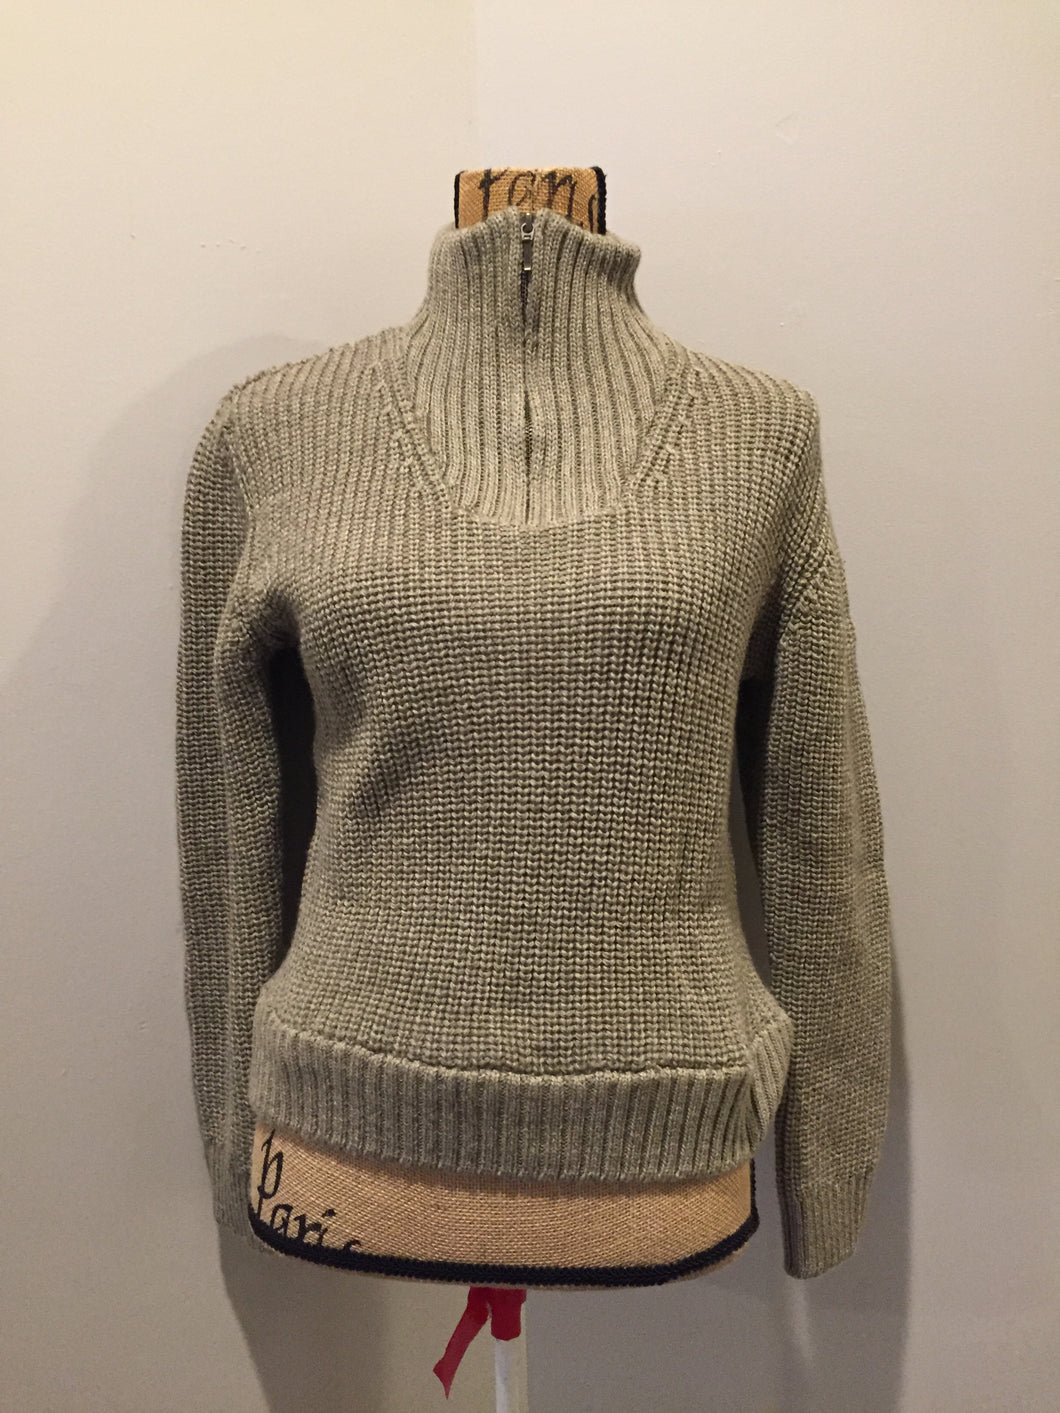 Kingspier Vintage - Aran ribbed knit merino wool sweater. Made in Ireland. Size small. *Bonus* From the TV show “Man in the High Castle” stock.